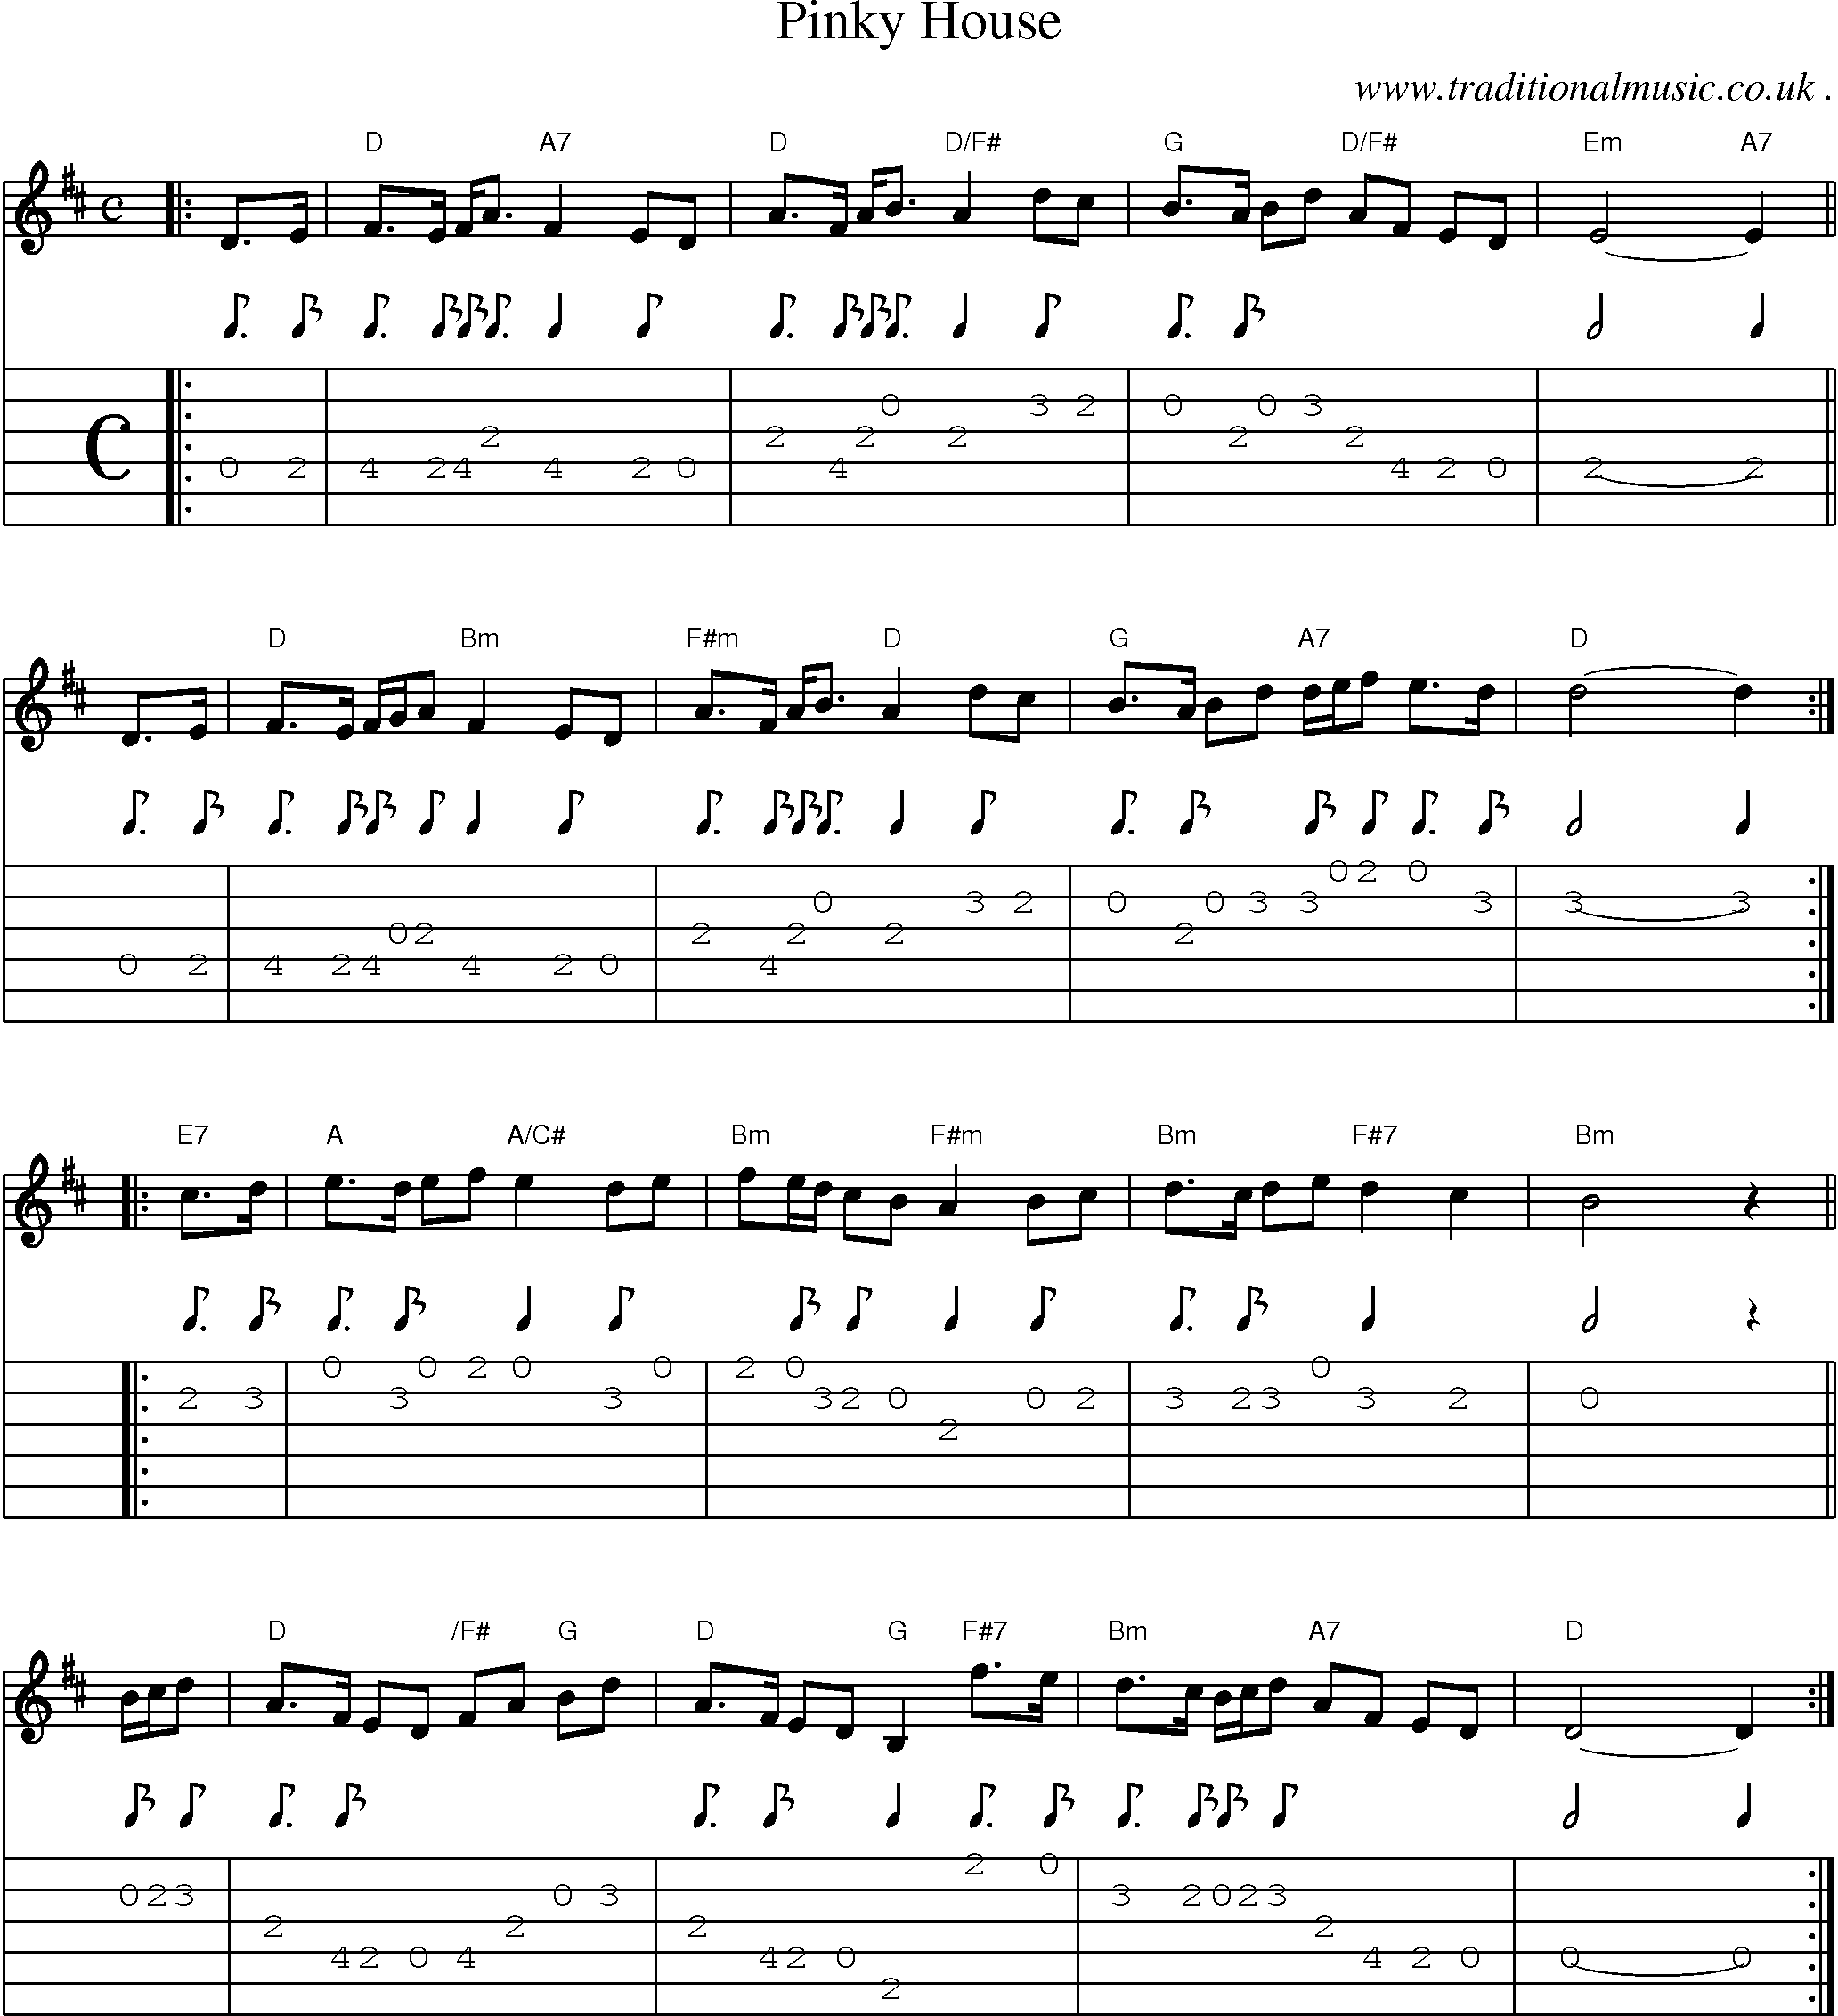 Sheet-music  score, Chords and Guitar Tabs for Pinky House